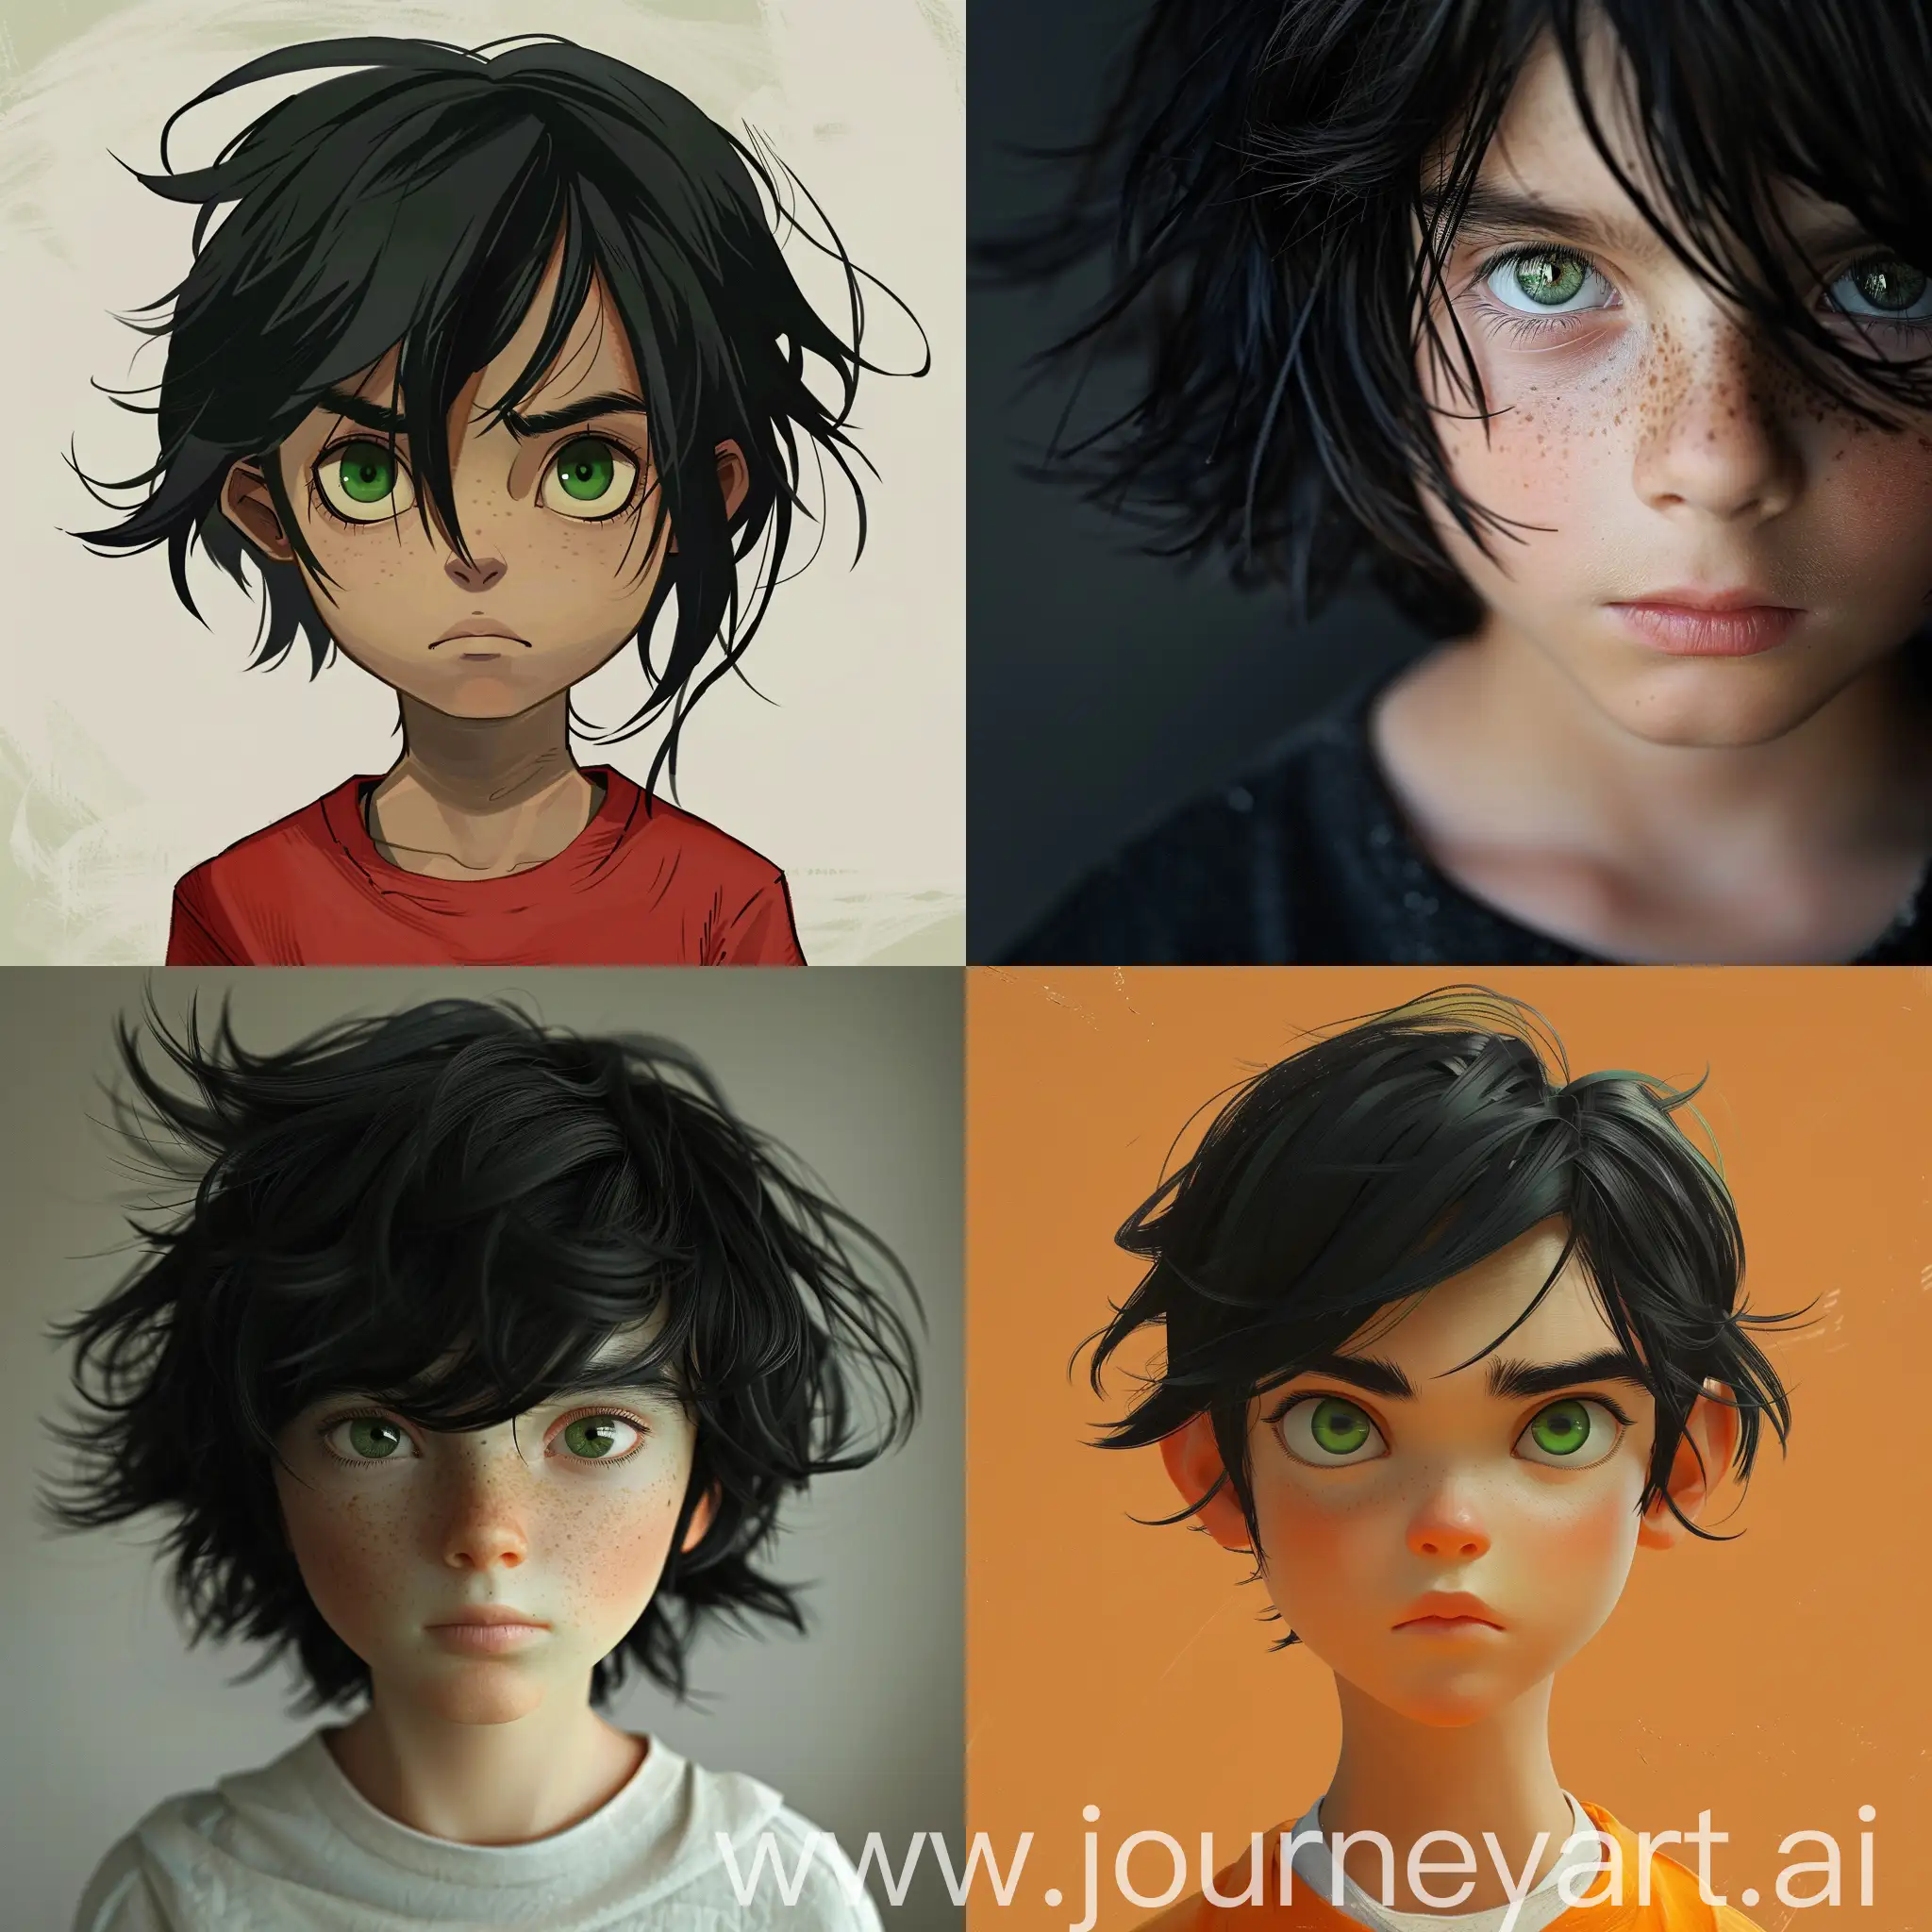 Leonard, a young Italian boy of 12 years old, with black hair, long green eyes, and an imposing stature.